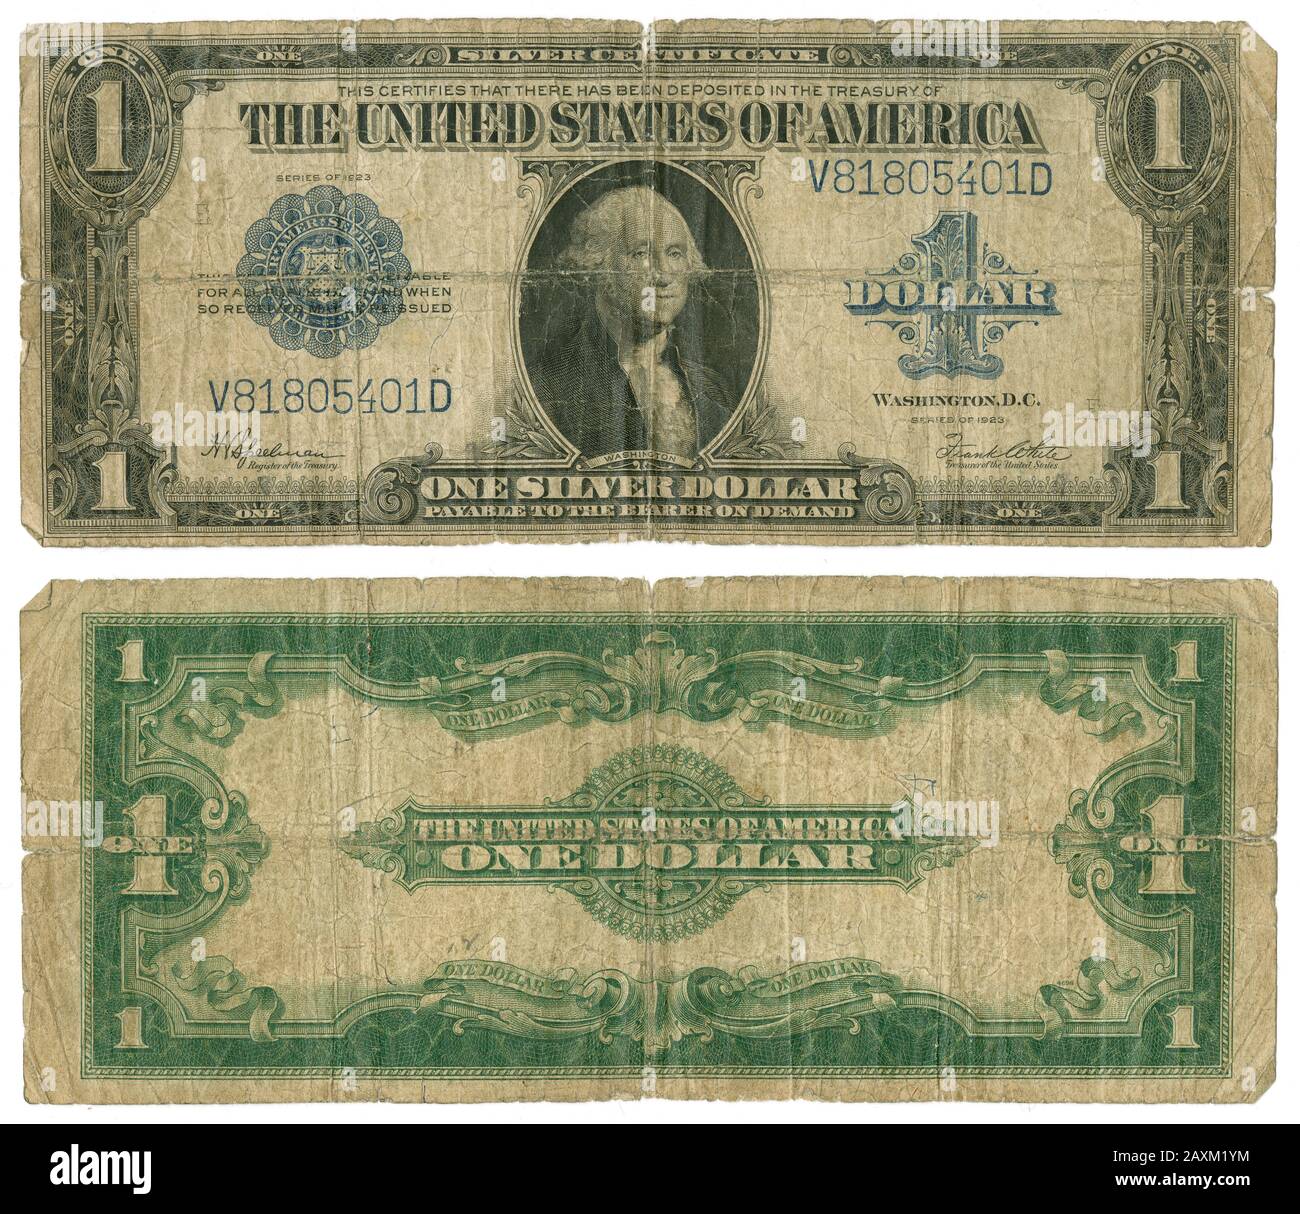 Antique 1923 United States of America $1 silver certificate, obverse and reverse. Stock Photo